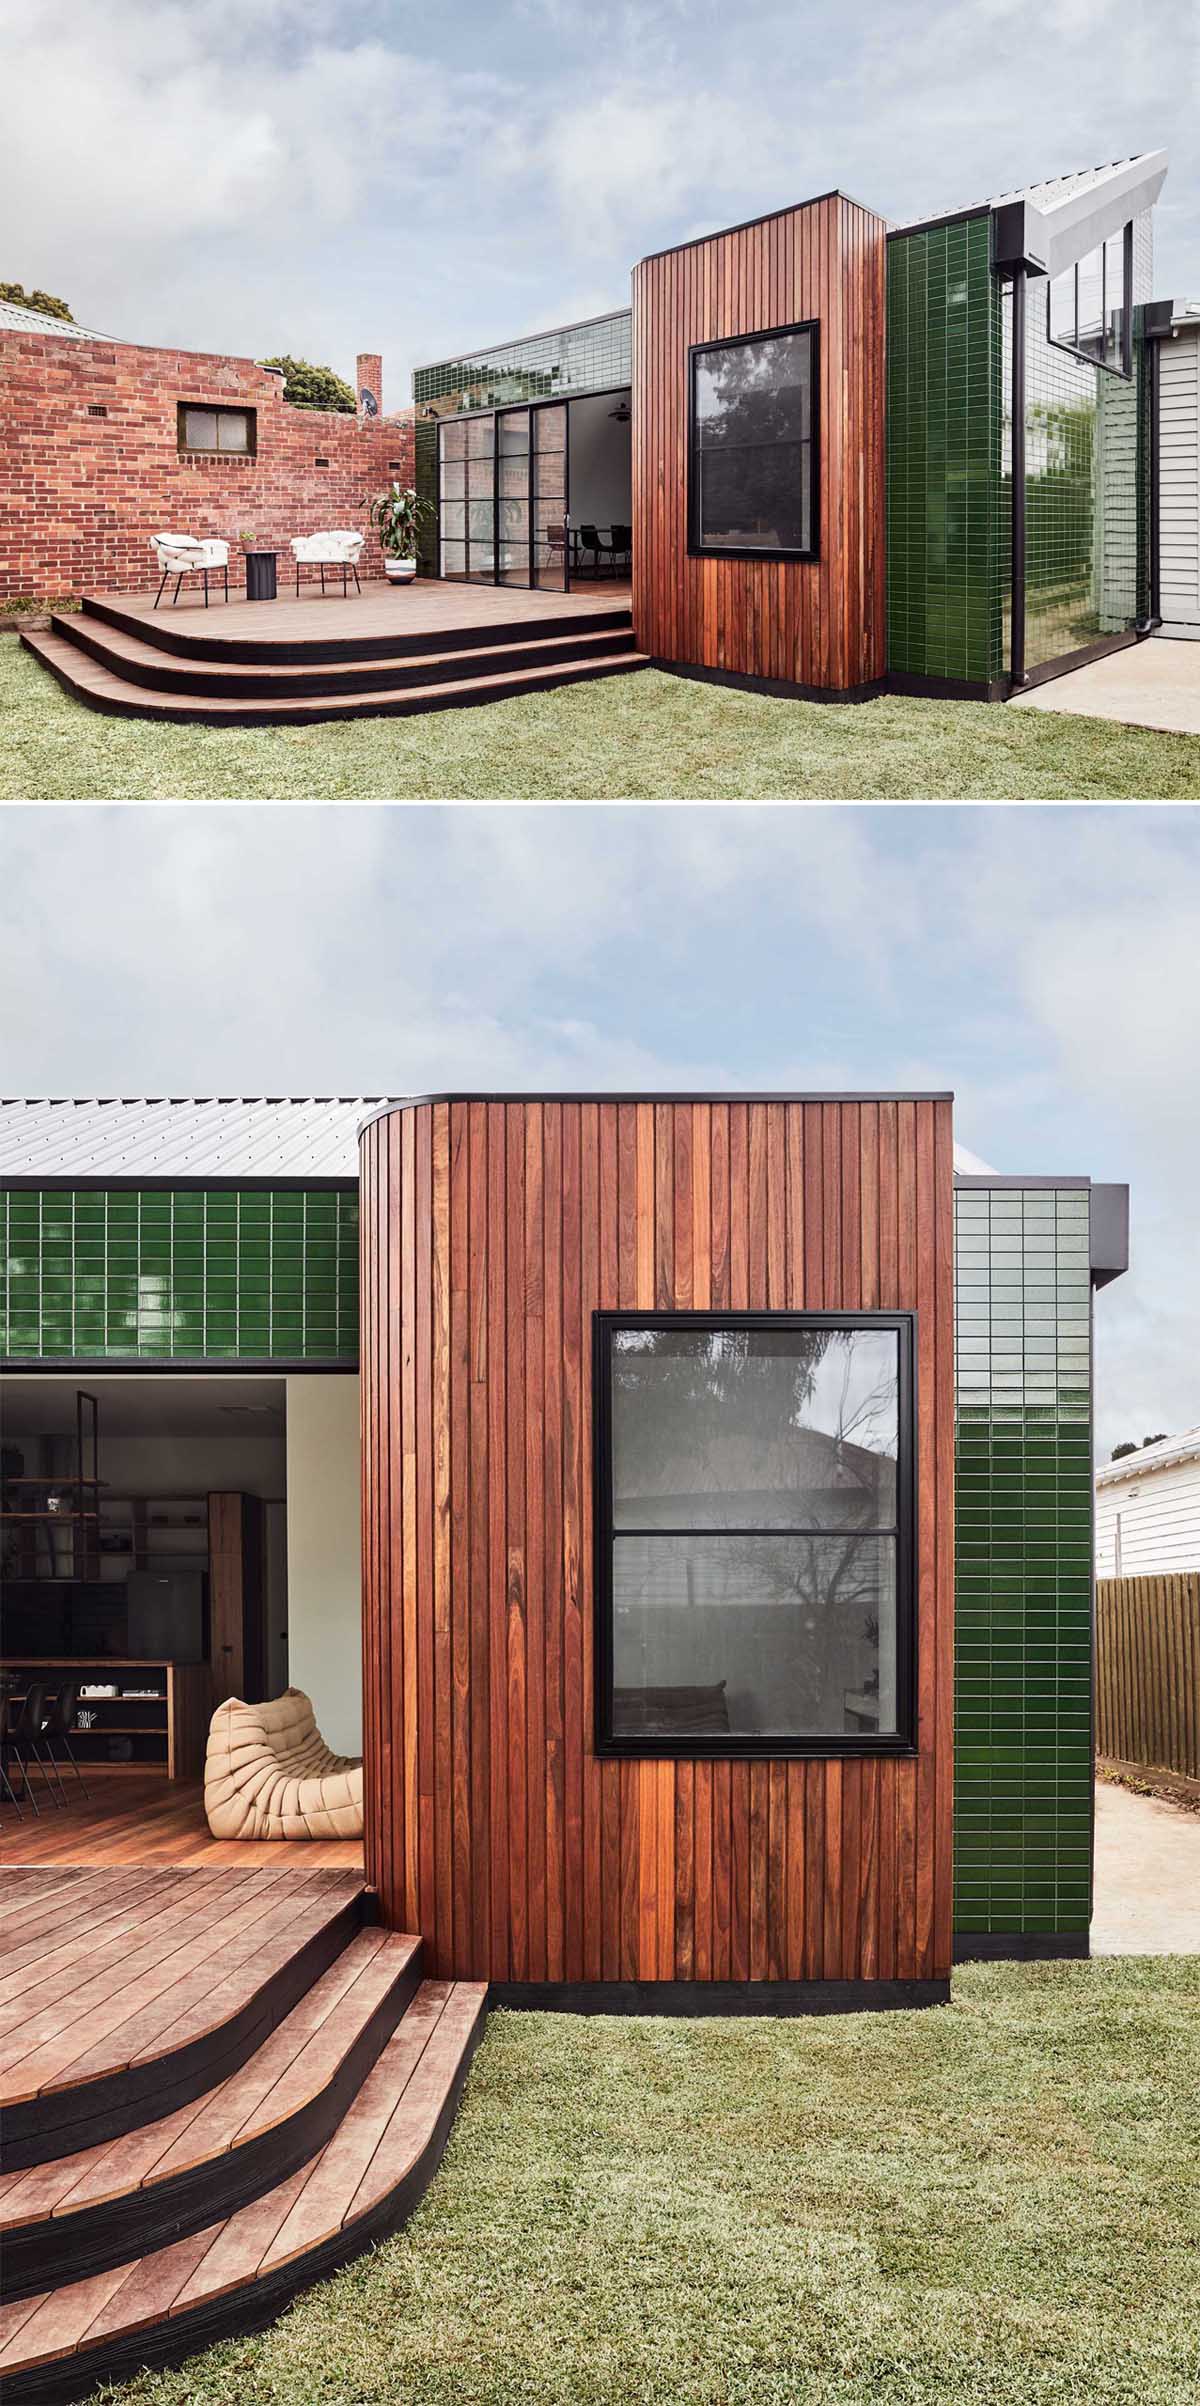 A modern house addition with glazed green tiles, vertical wood siding, and a deck.